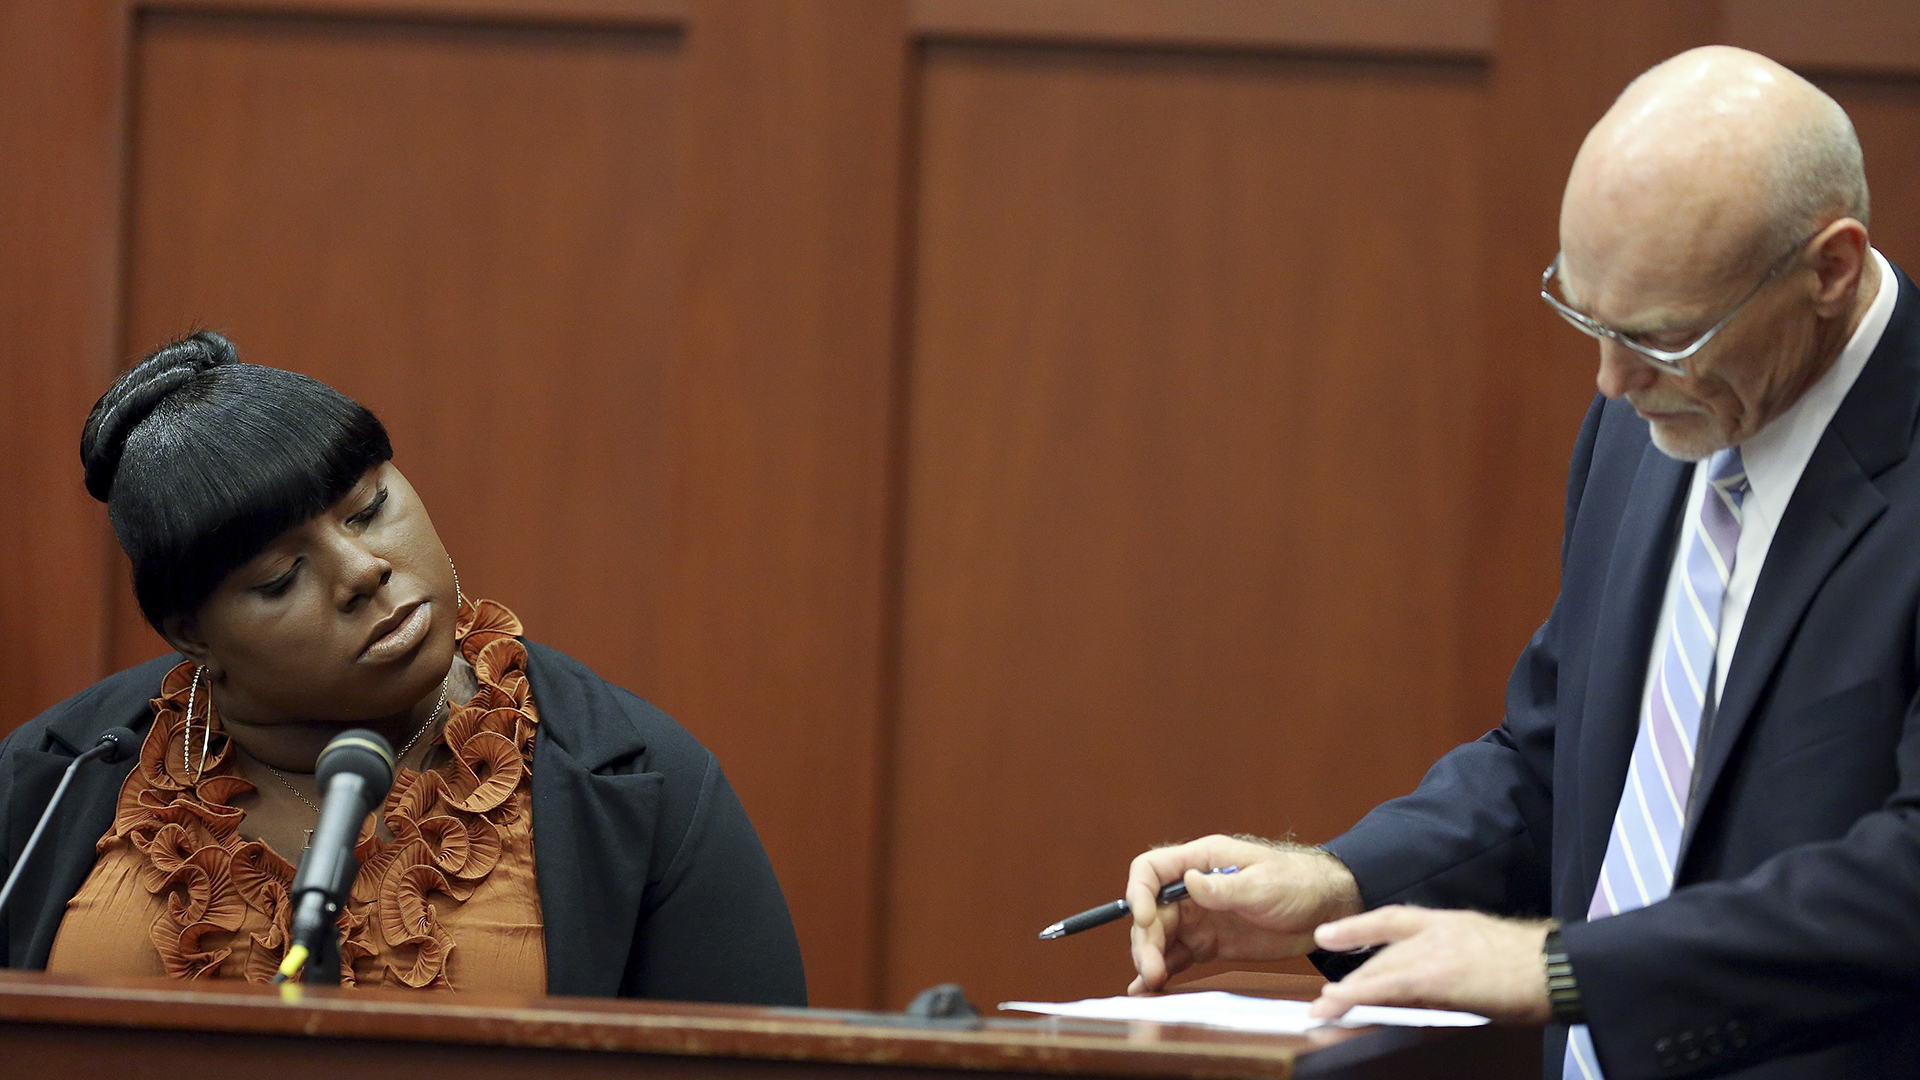 Rachel Jeantel on the stand during her testimony in the trial of George Zimmerman